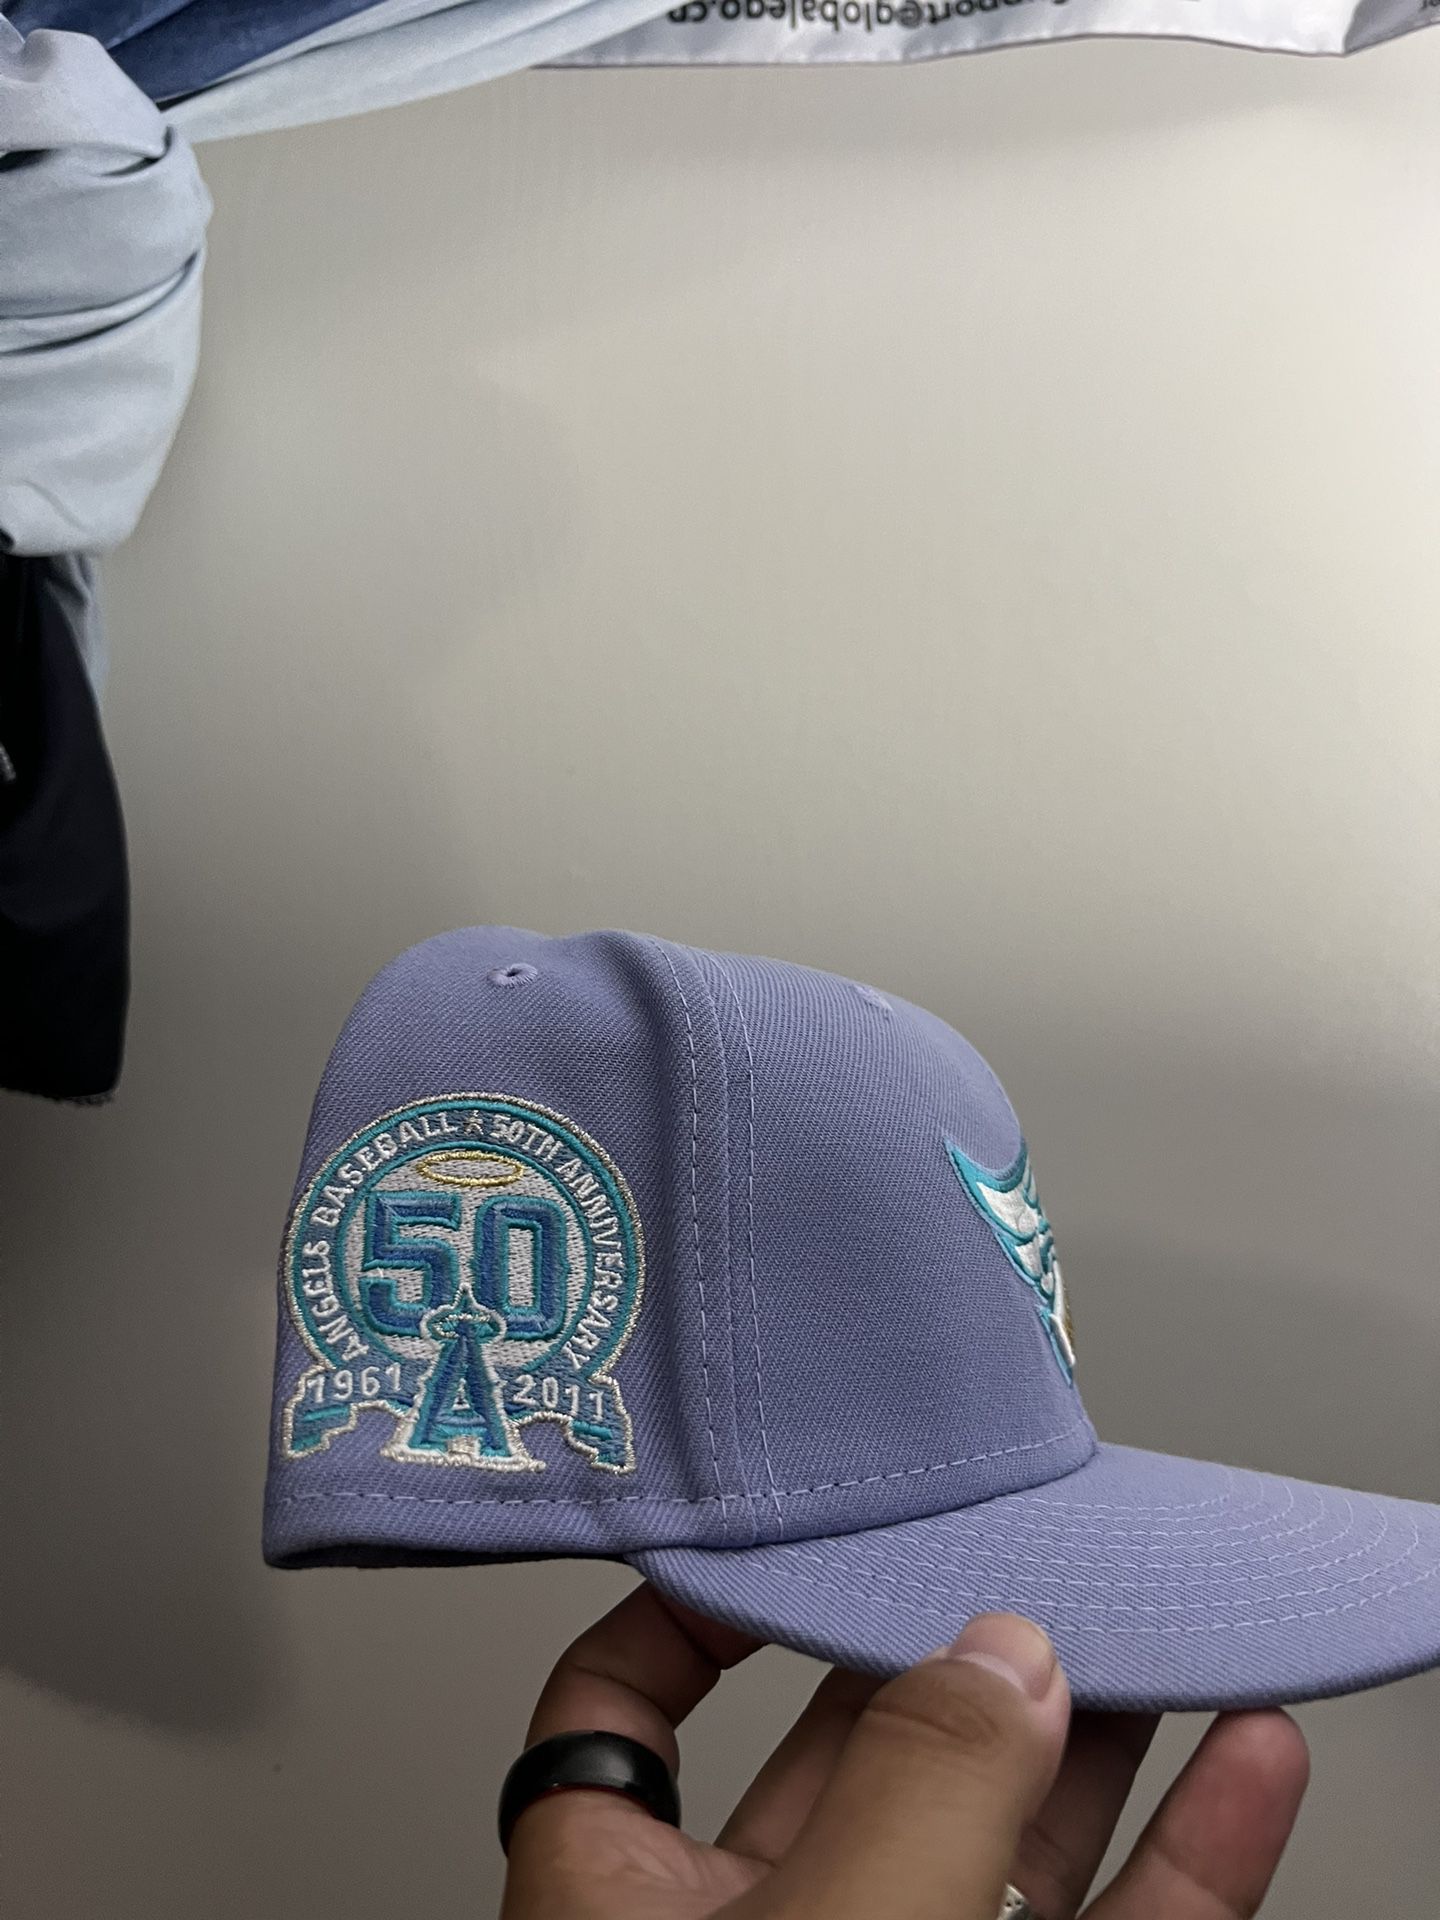 Anaheim Angels Hat Size 7 3/8 for Sale in Los Angeles, CA - OfferUp